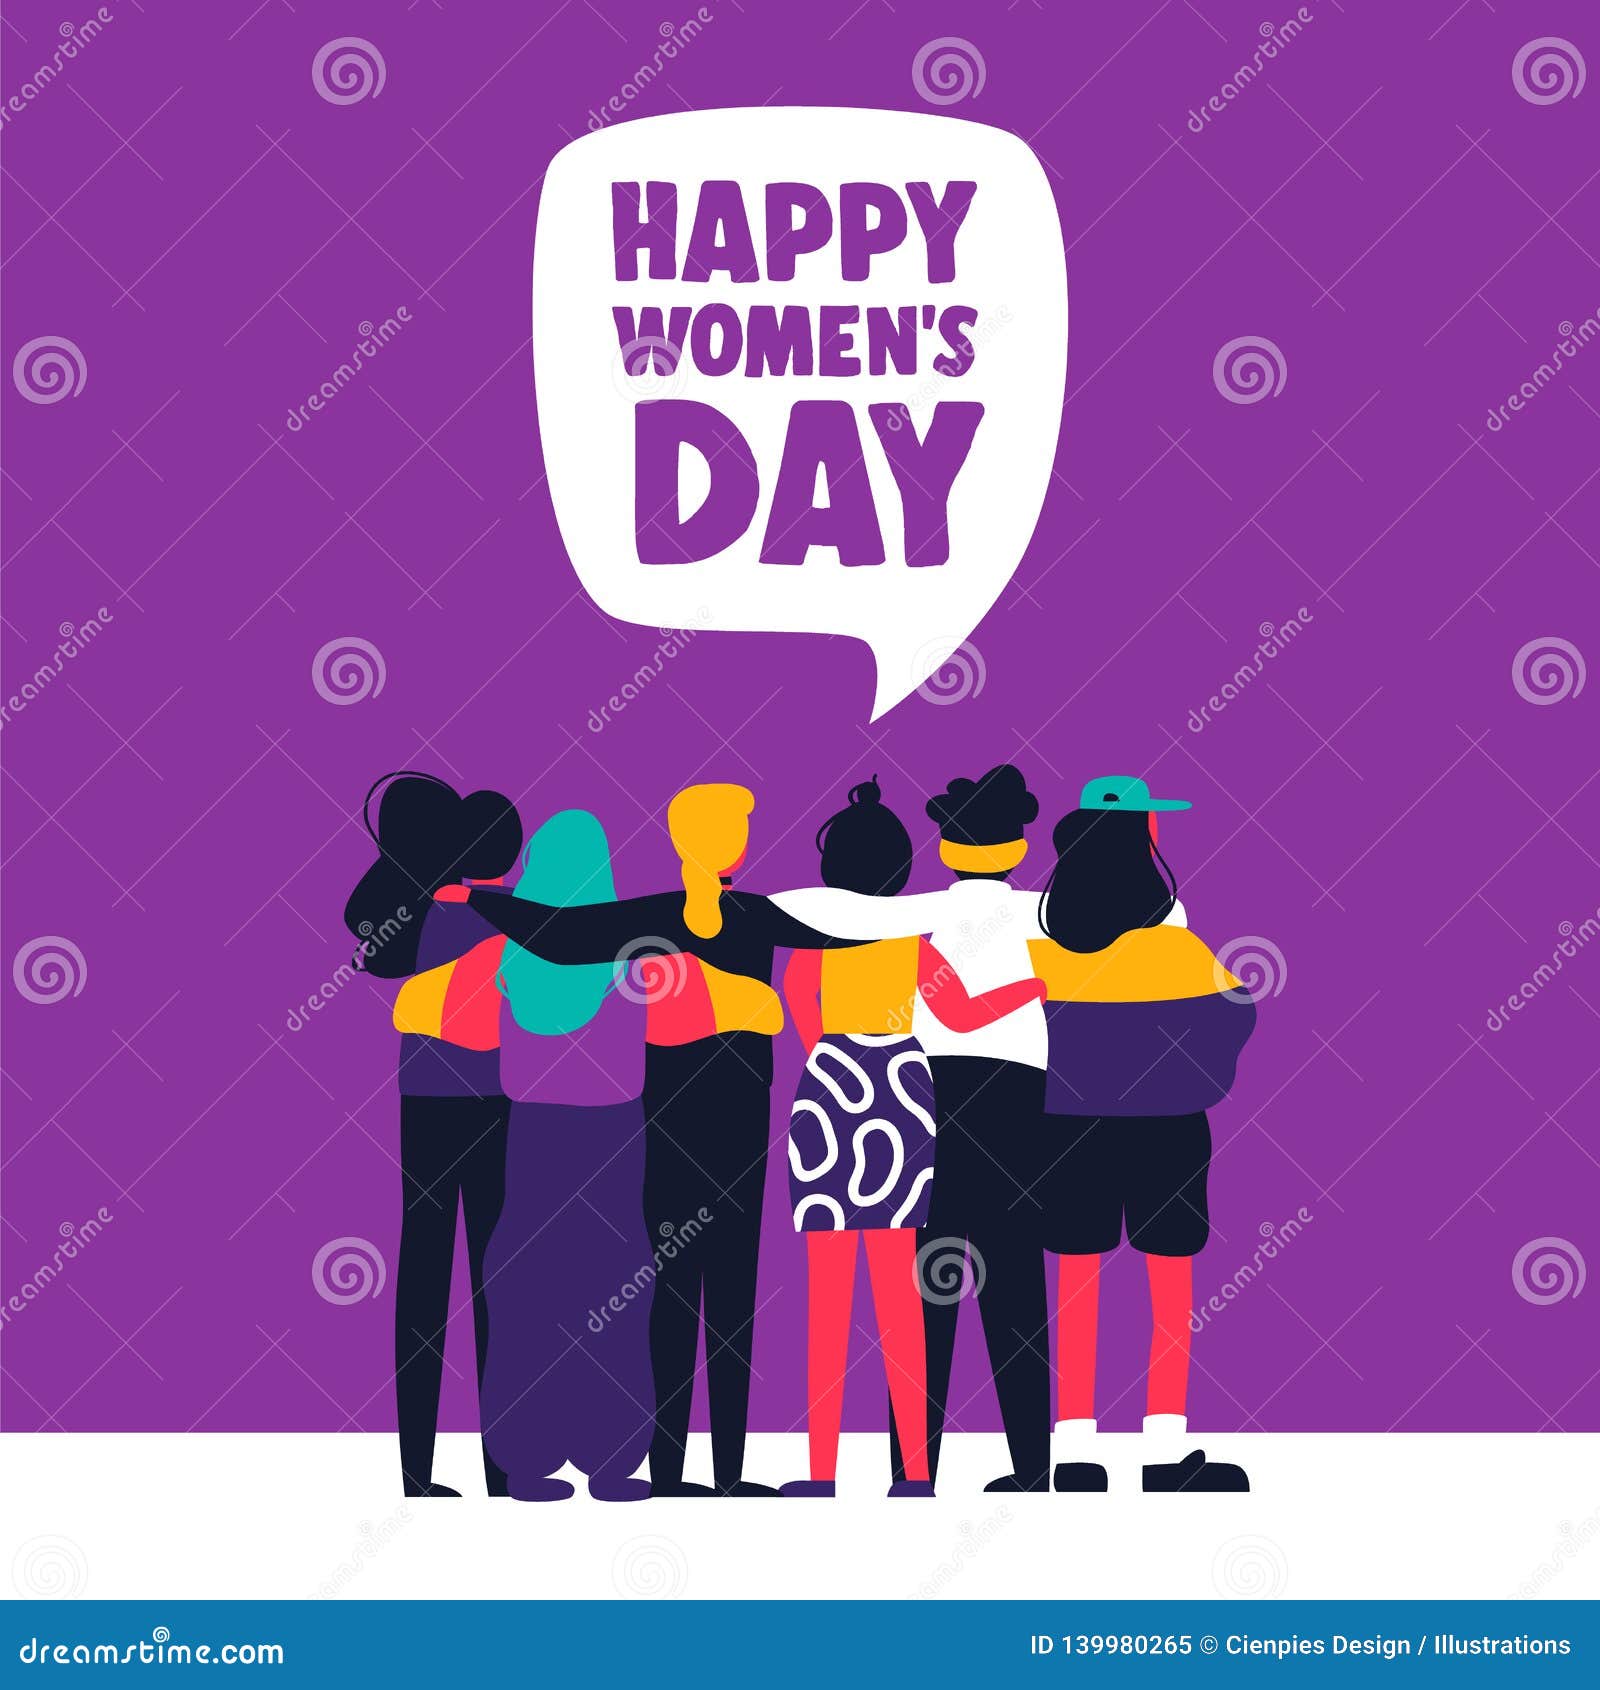 happy womens day card of women friends together